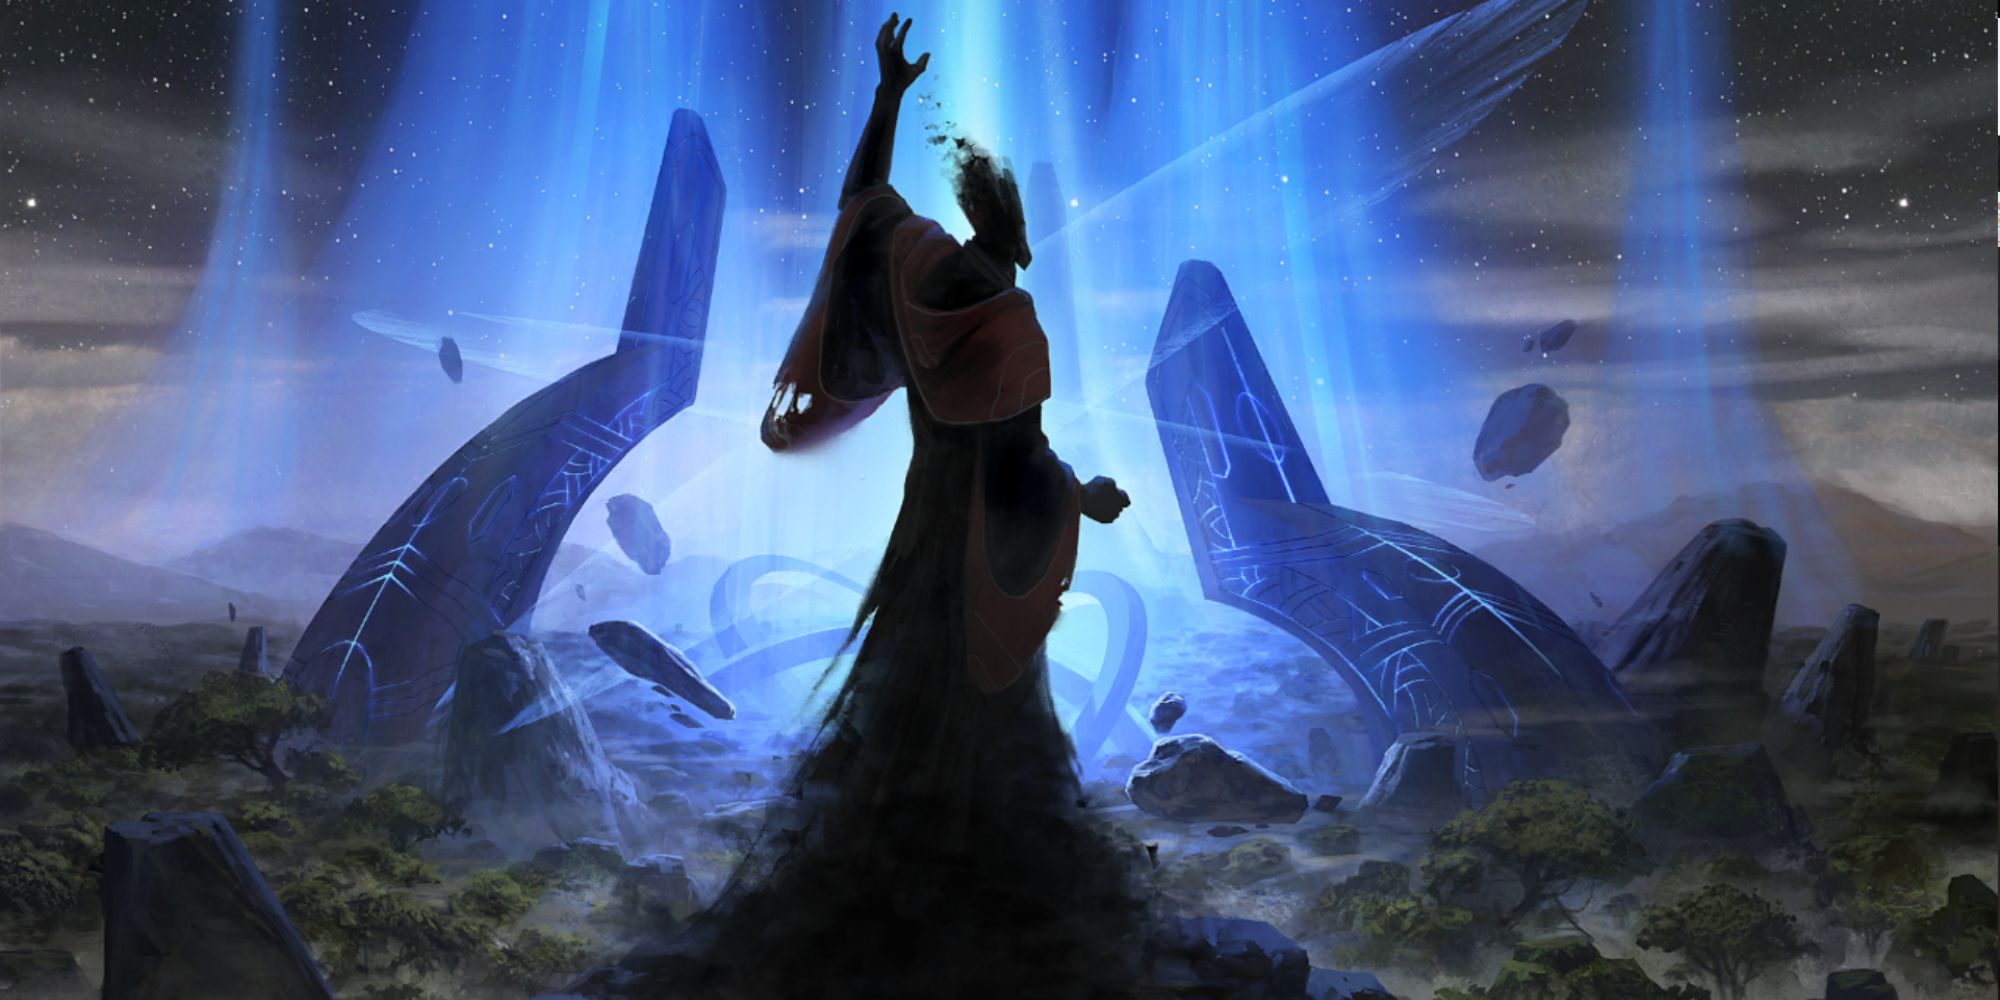 A mage awakens a piece of alien technology on the loading screen of Endless Legend